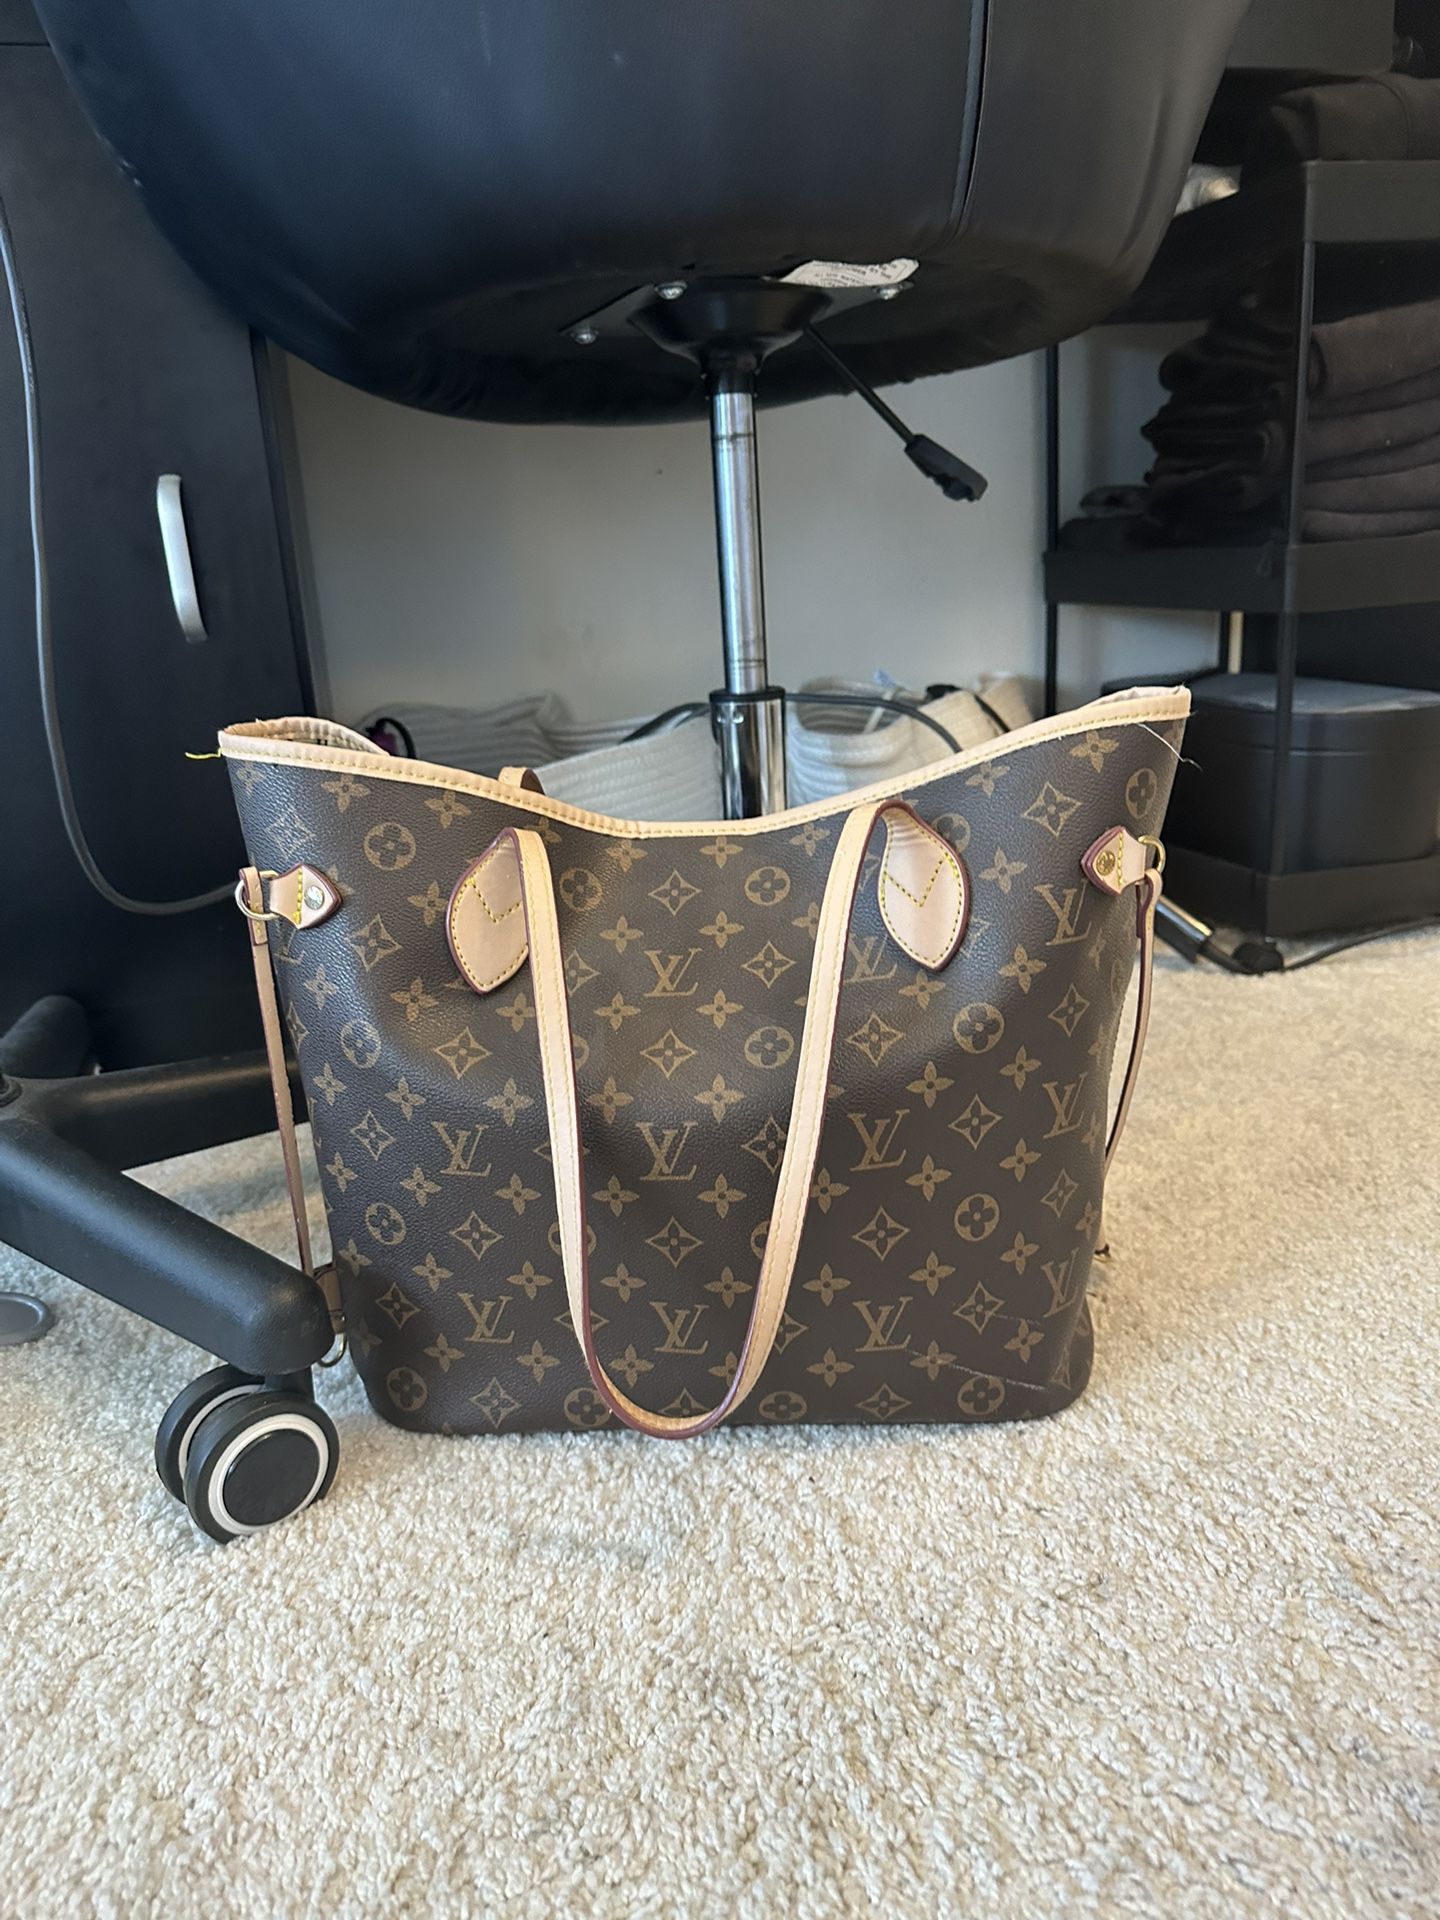 Is it worth it to pay $800 for a secondhand, excellent condition Louis  Vuitton MM Neverfull bag? - Quora